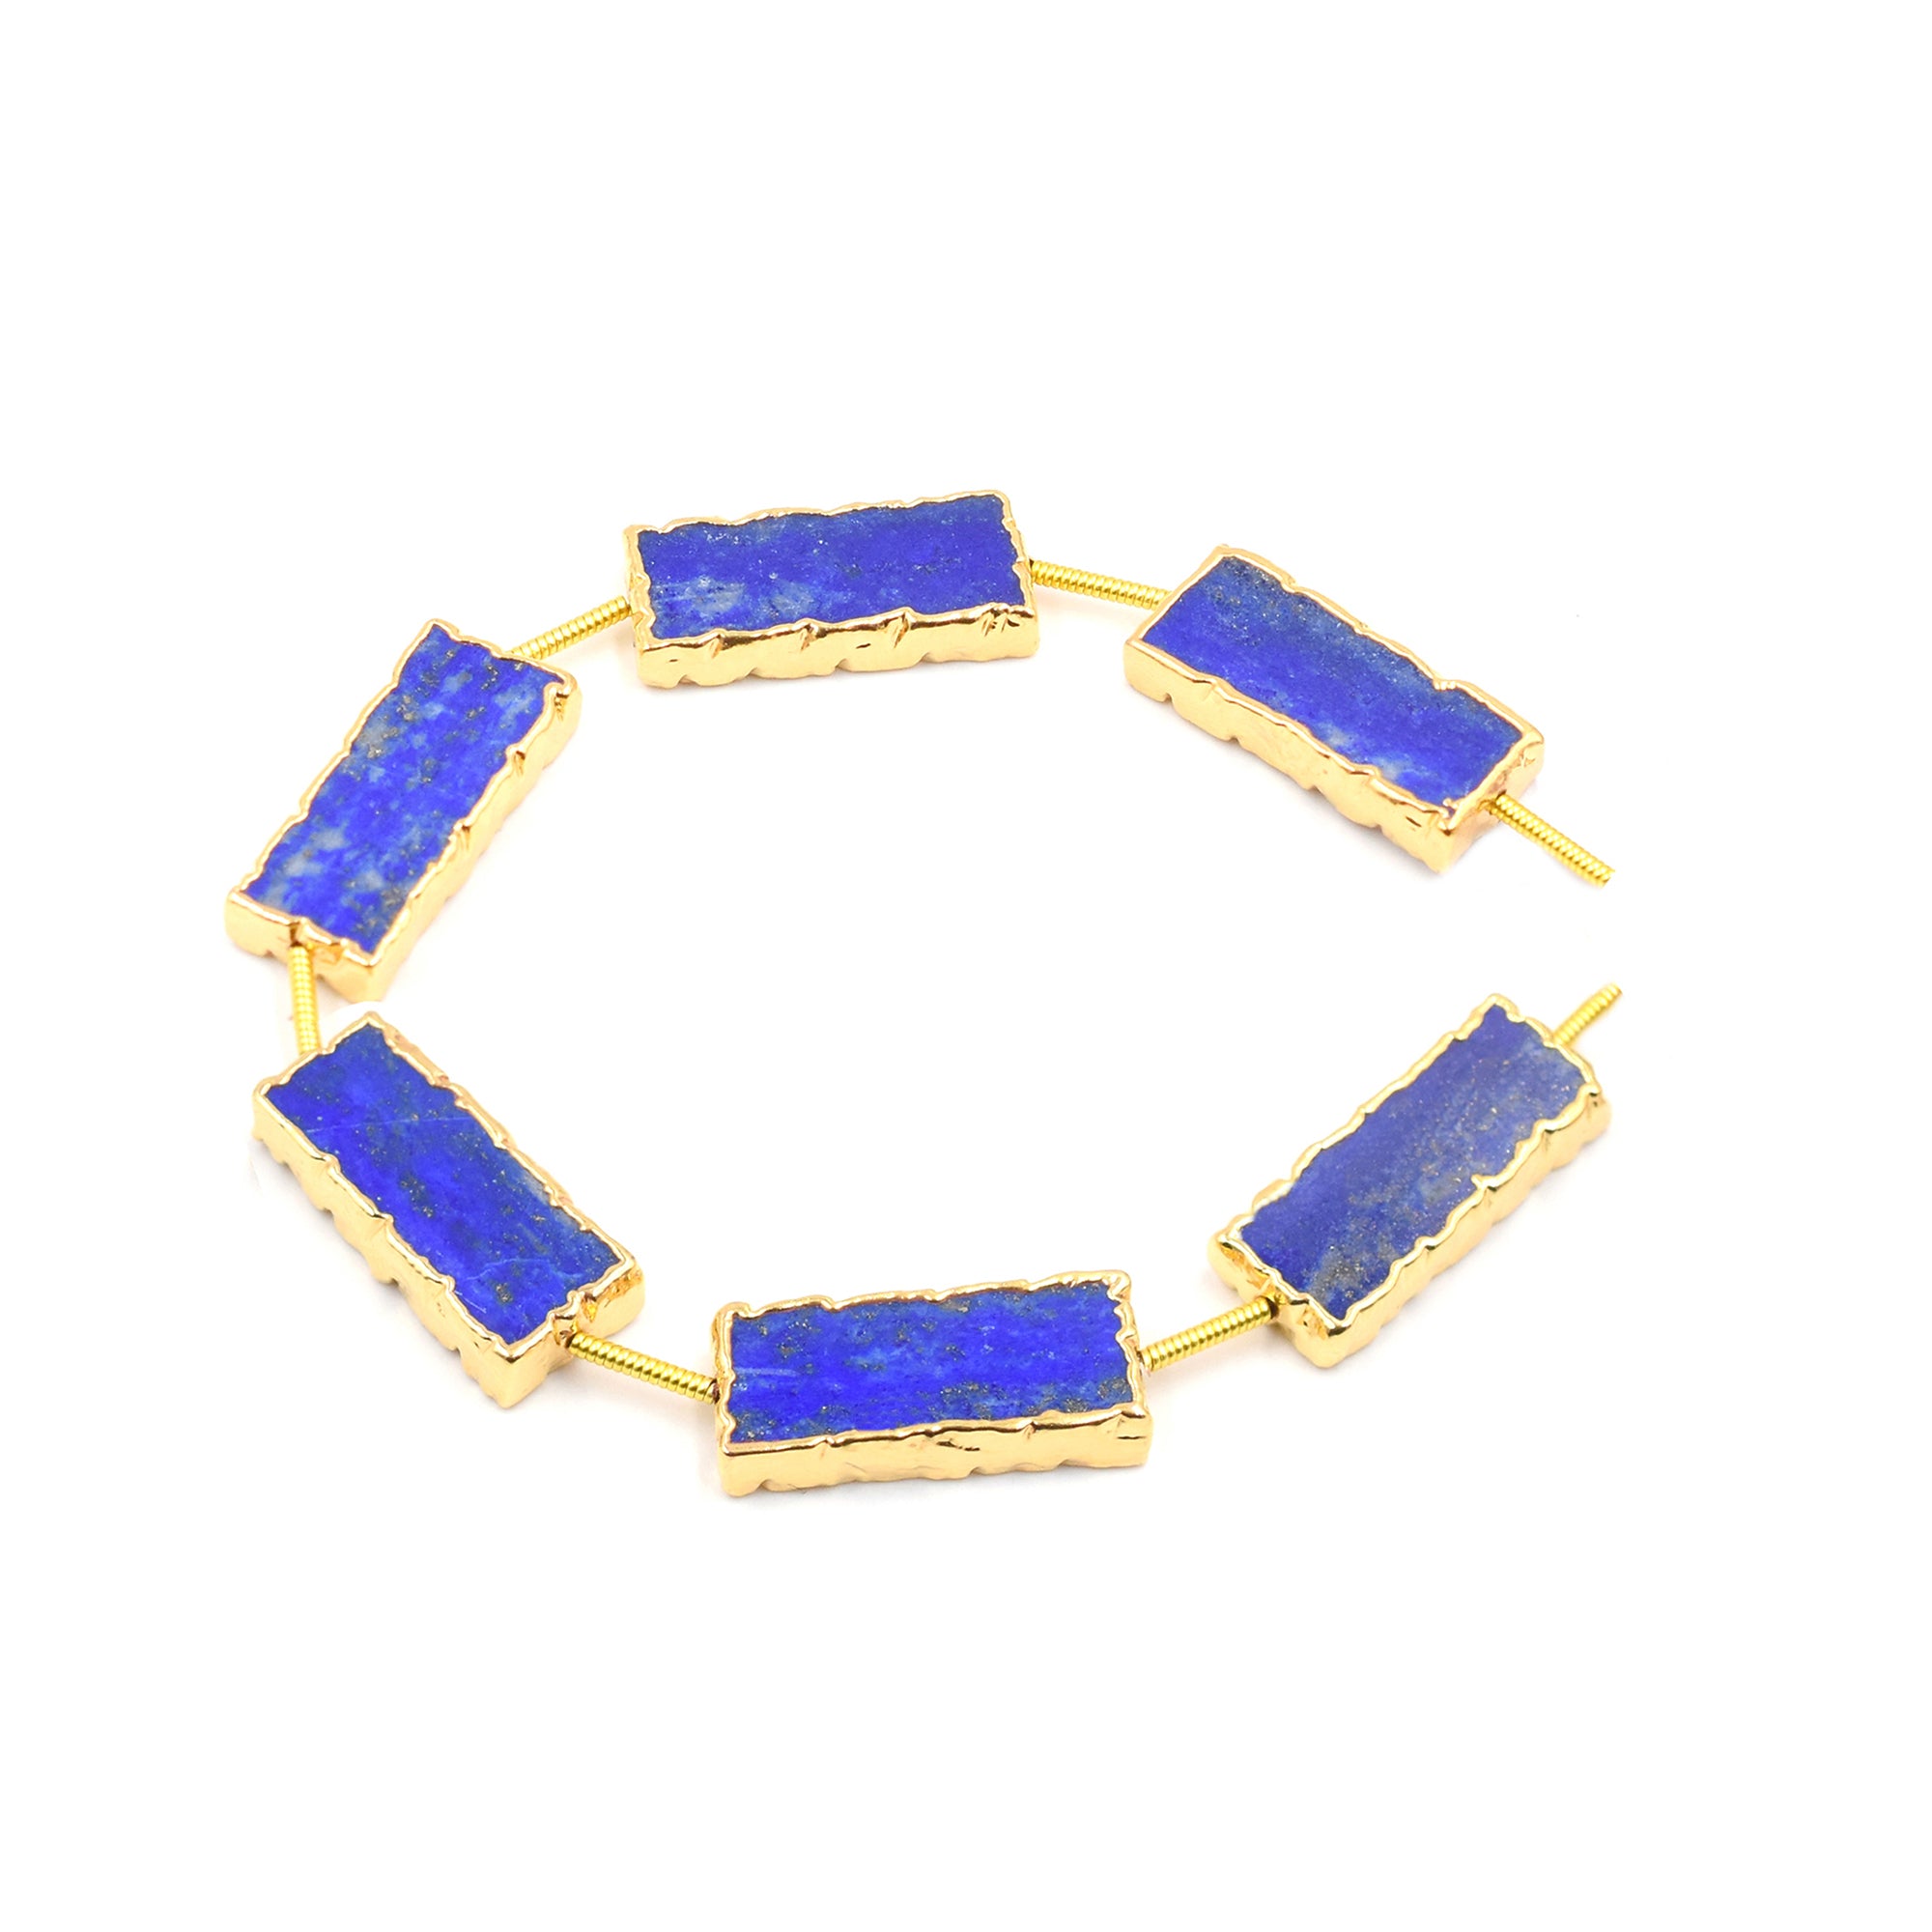 Lapis Lazuli 20X7 MM Rectangle Shape Straight Drilled Gold Electroplated Strand